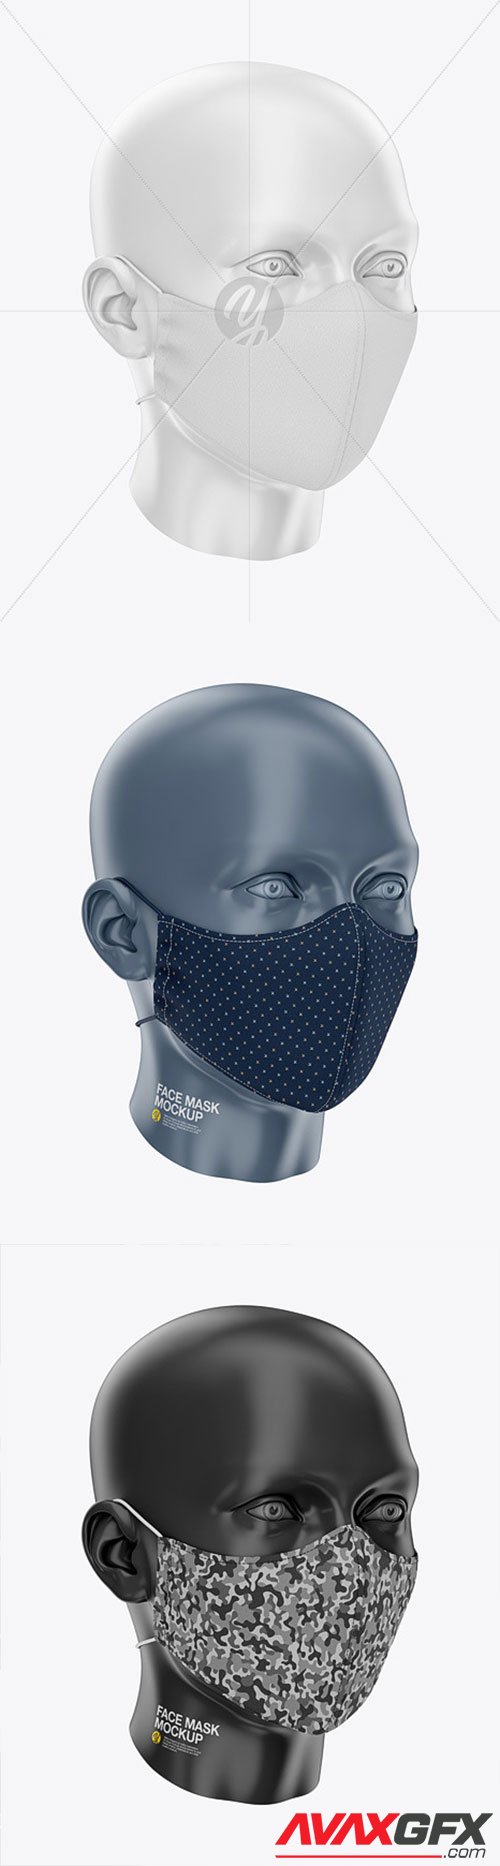 Face Mask with Elastic Cord and Stopper - Front Half-Side View 61433